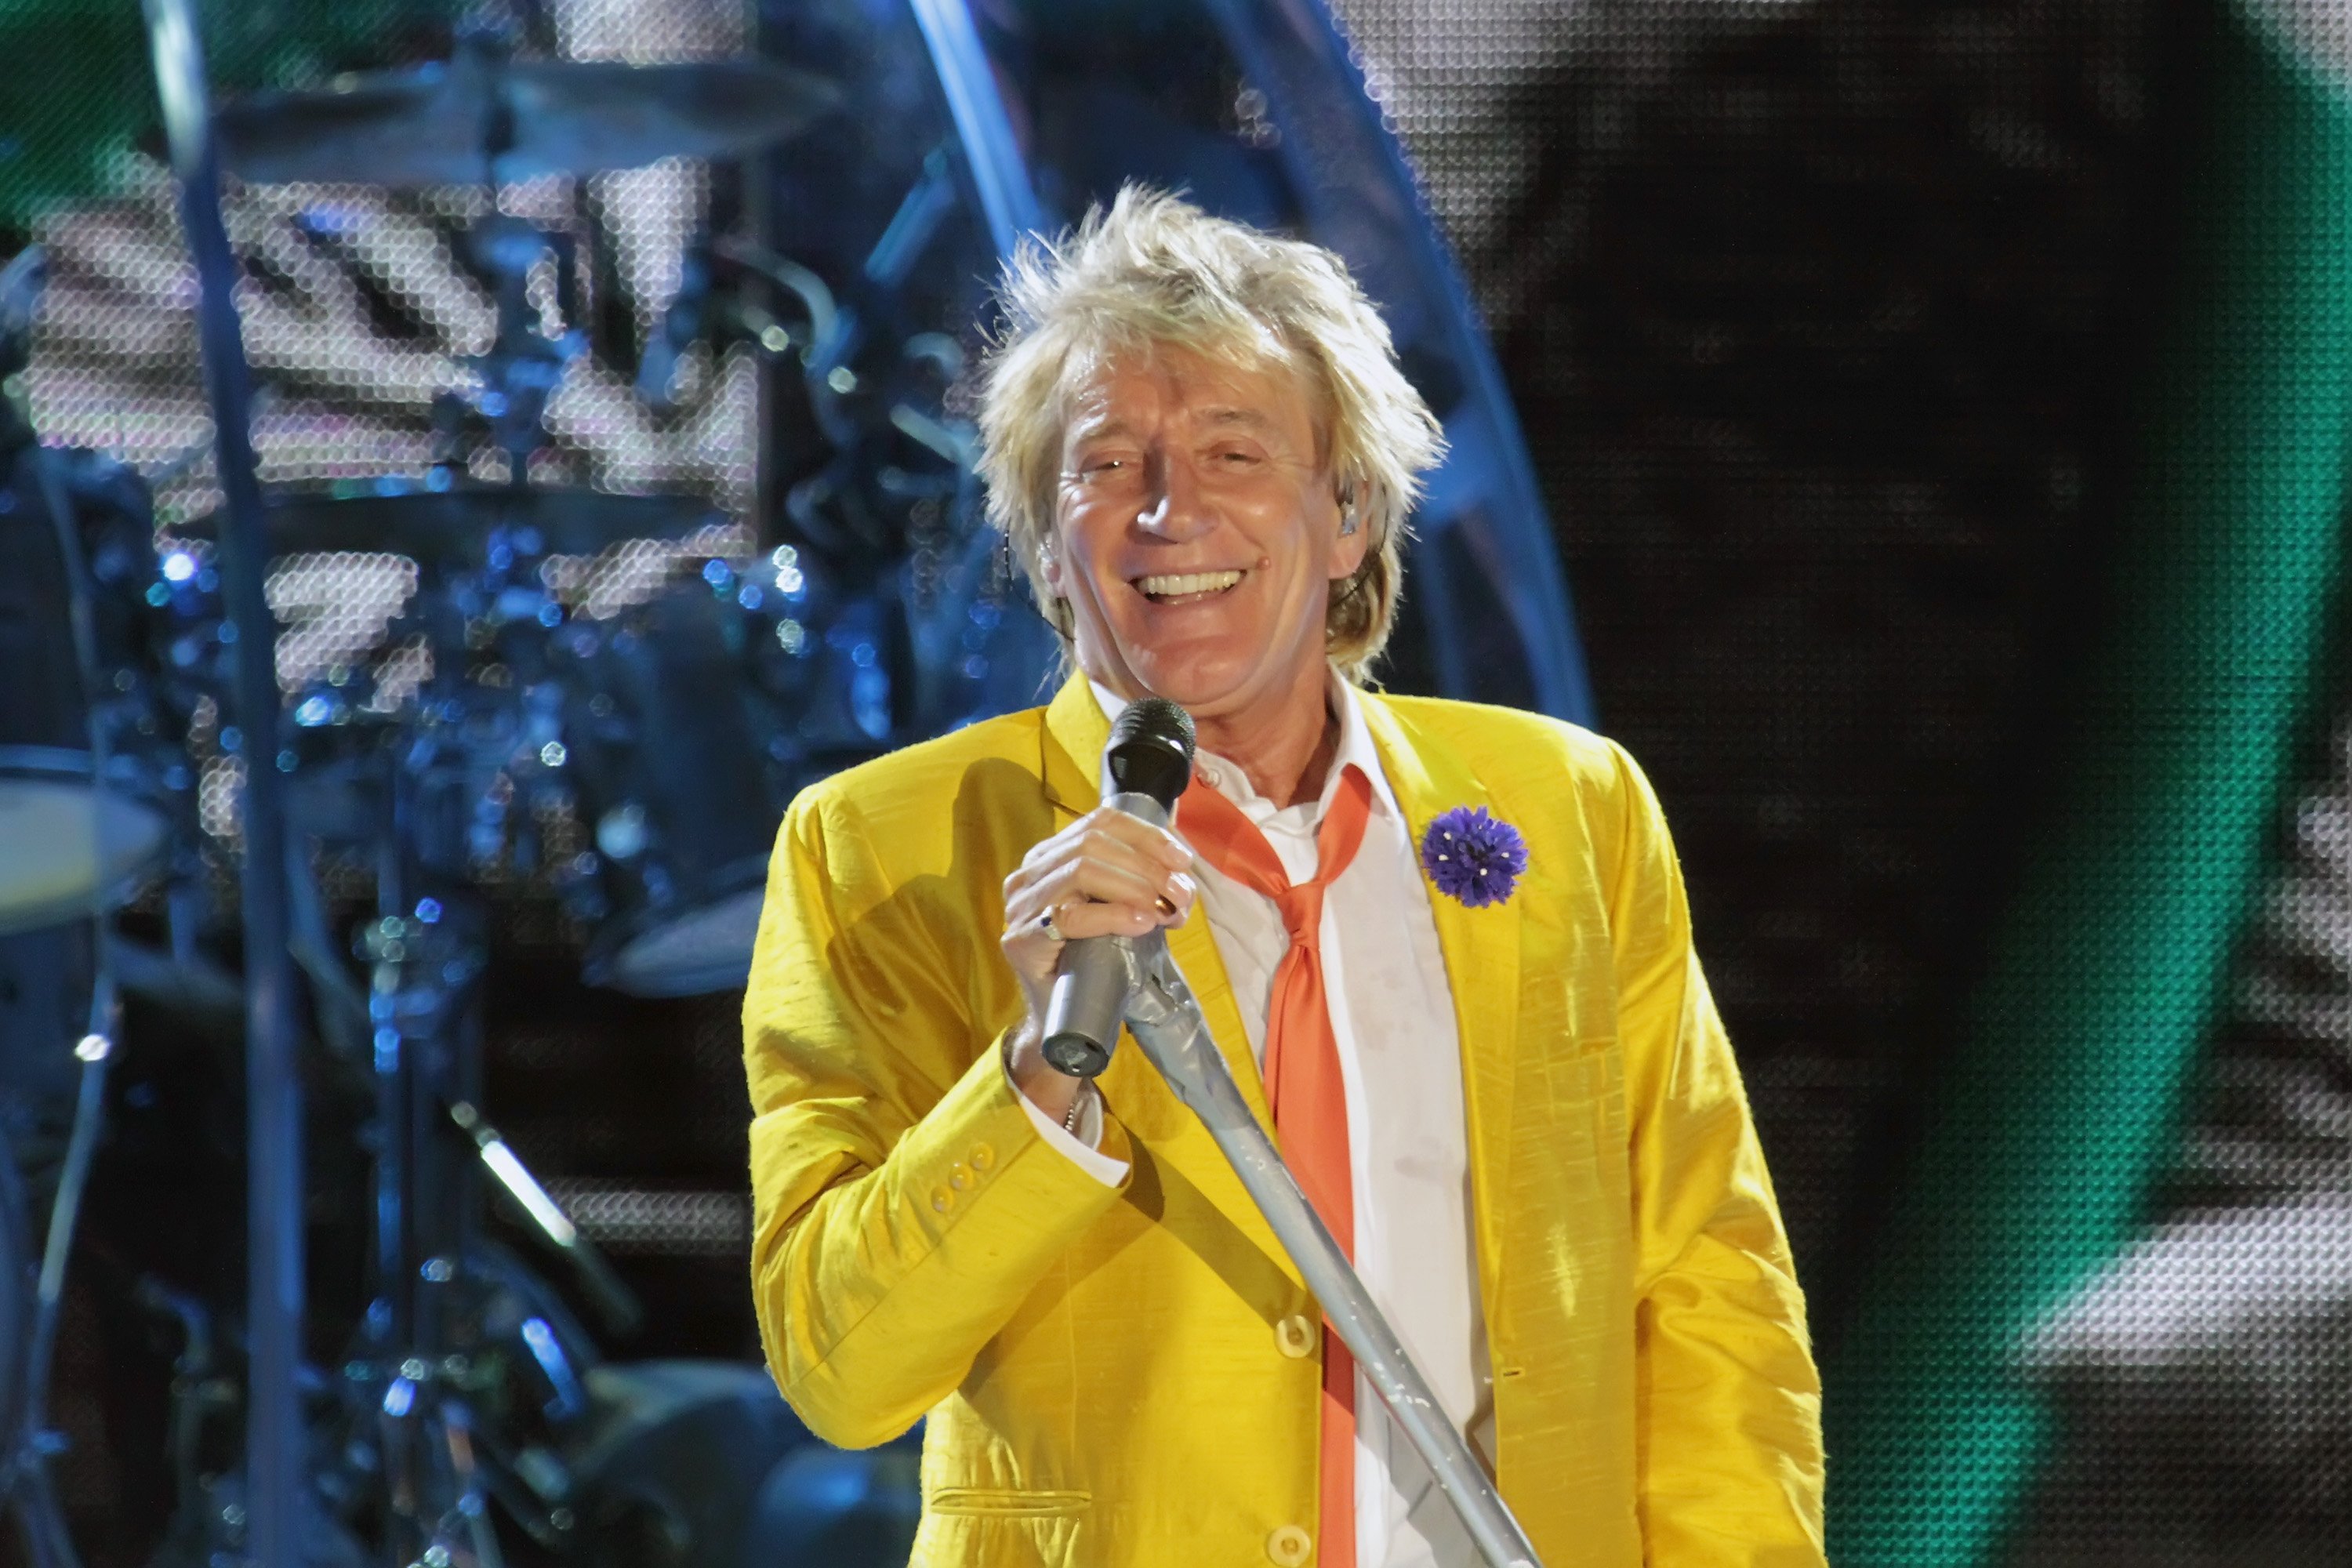 Singer Rod Stewart performs at Mark G. Etess Arena - Trump Taj Mahal on August 23, 2014 in Atlantic City, New Jersey ┃Source: Getty Images